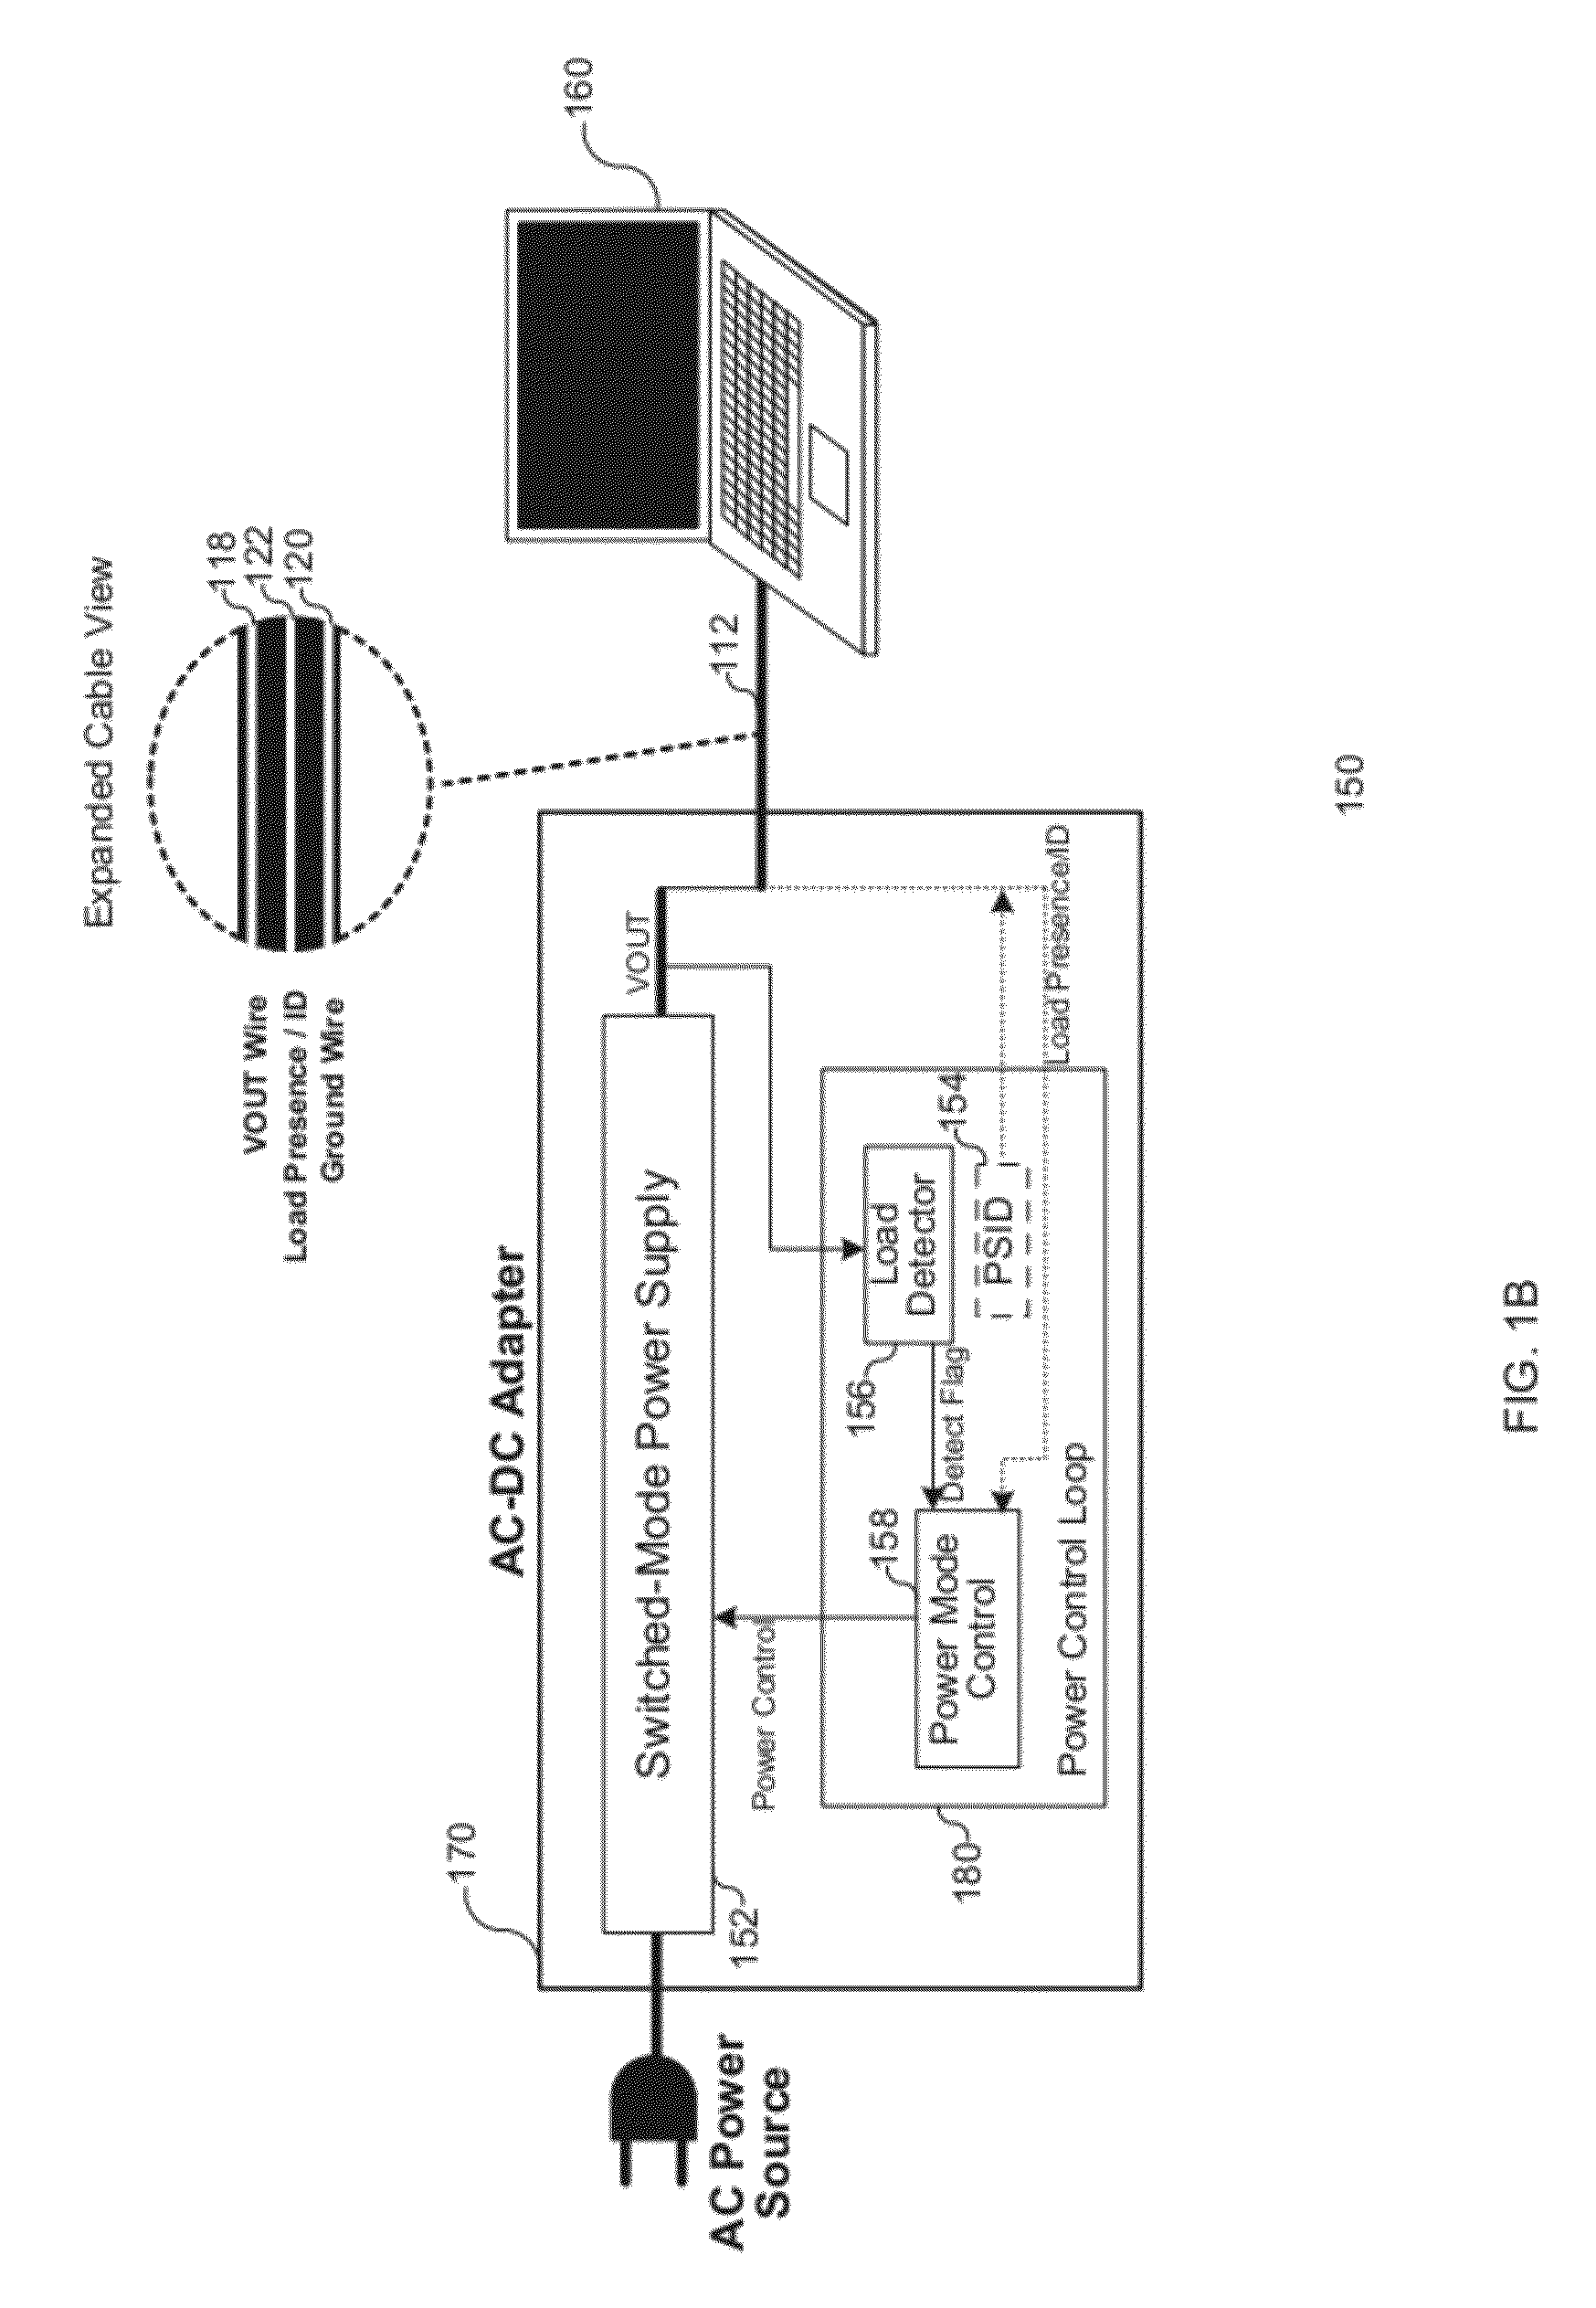 Load Detection for a Low Power Mode in an AC-DC Adapter